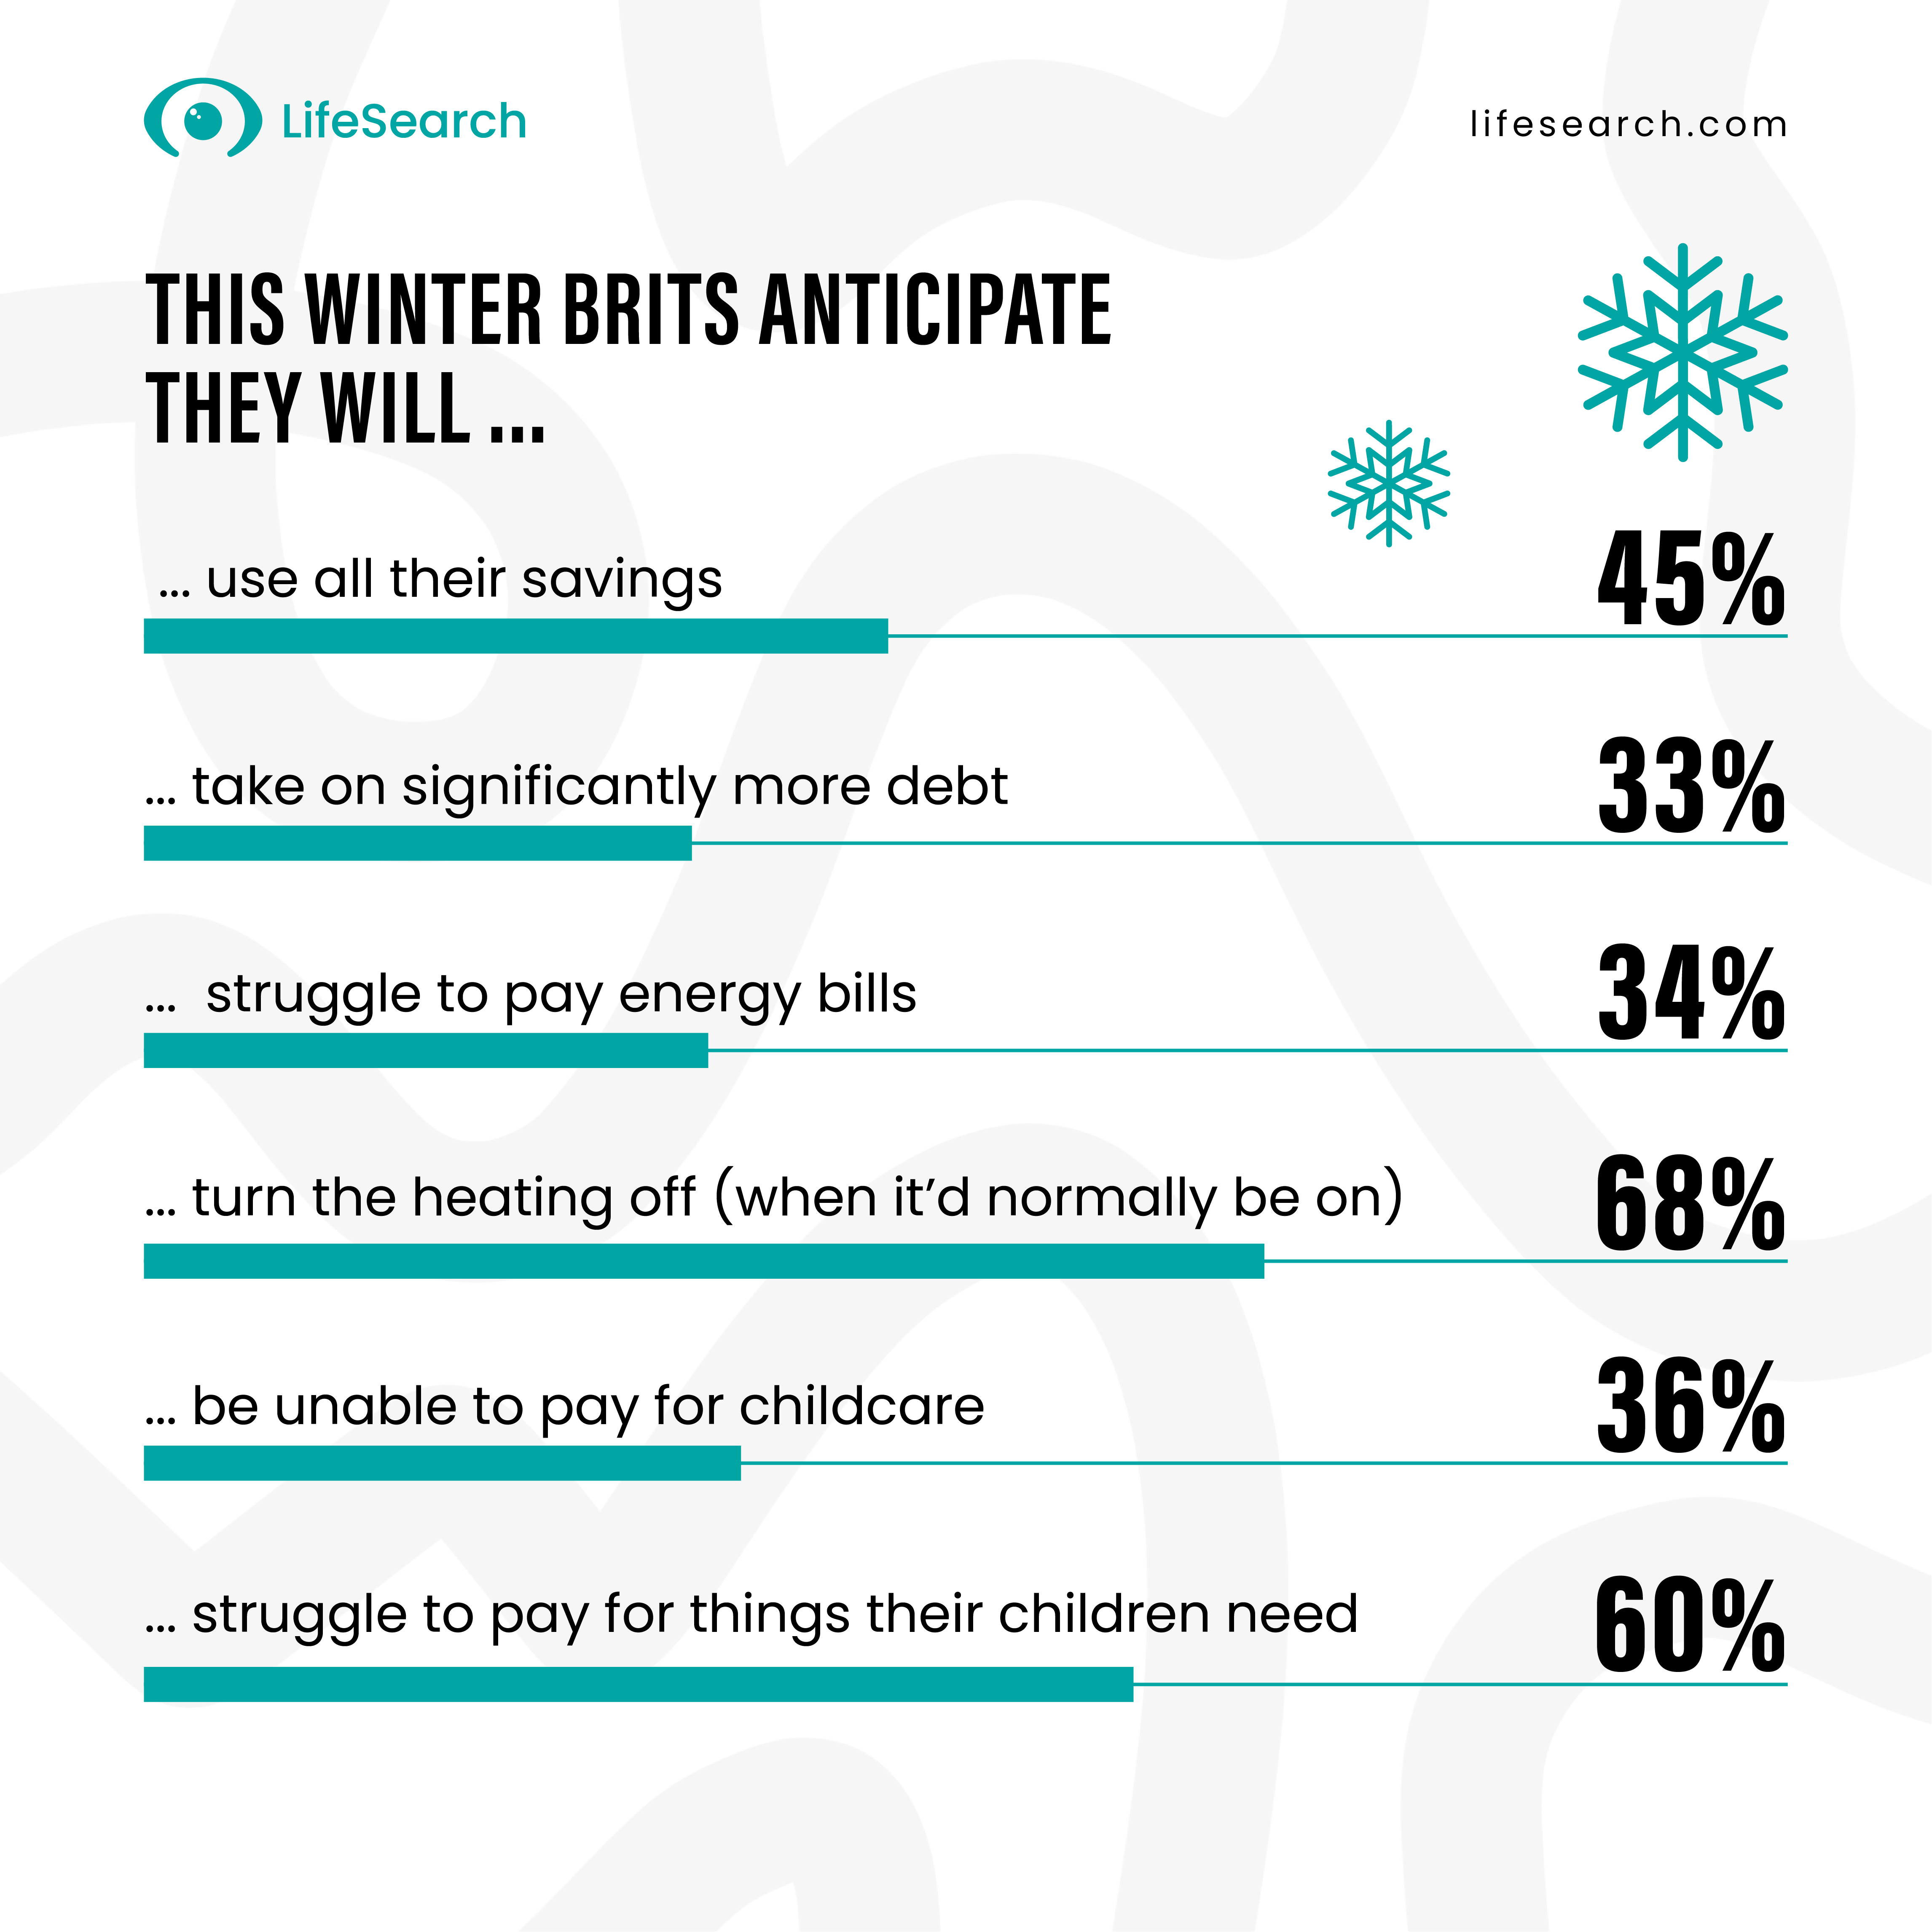 Table showing what Brits anticipate they will do to cut cost this winter